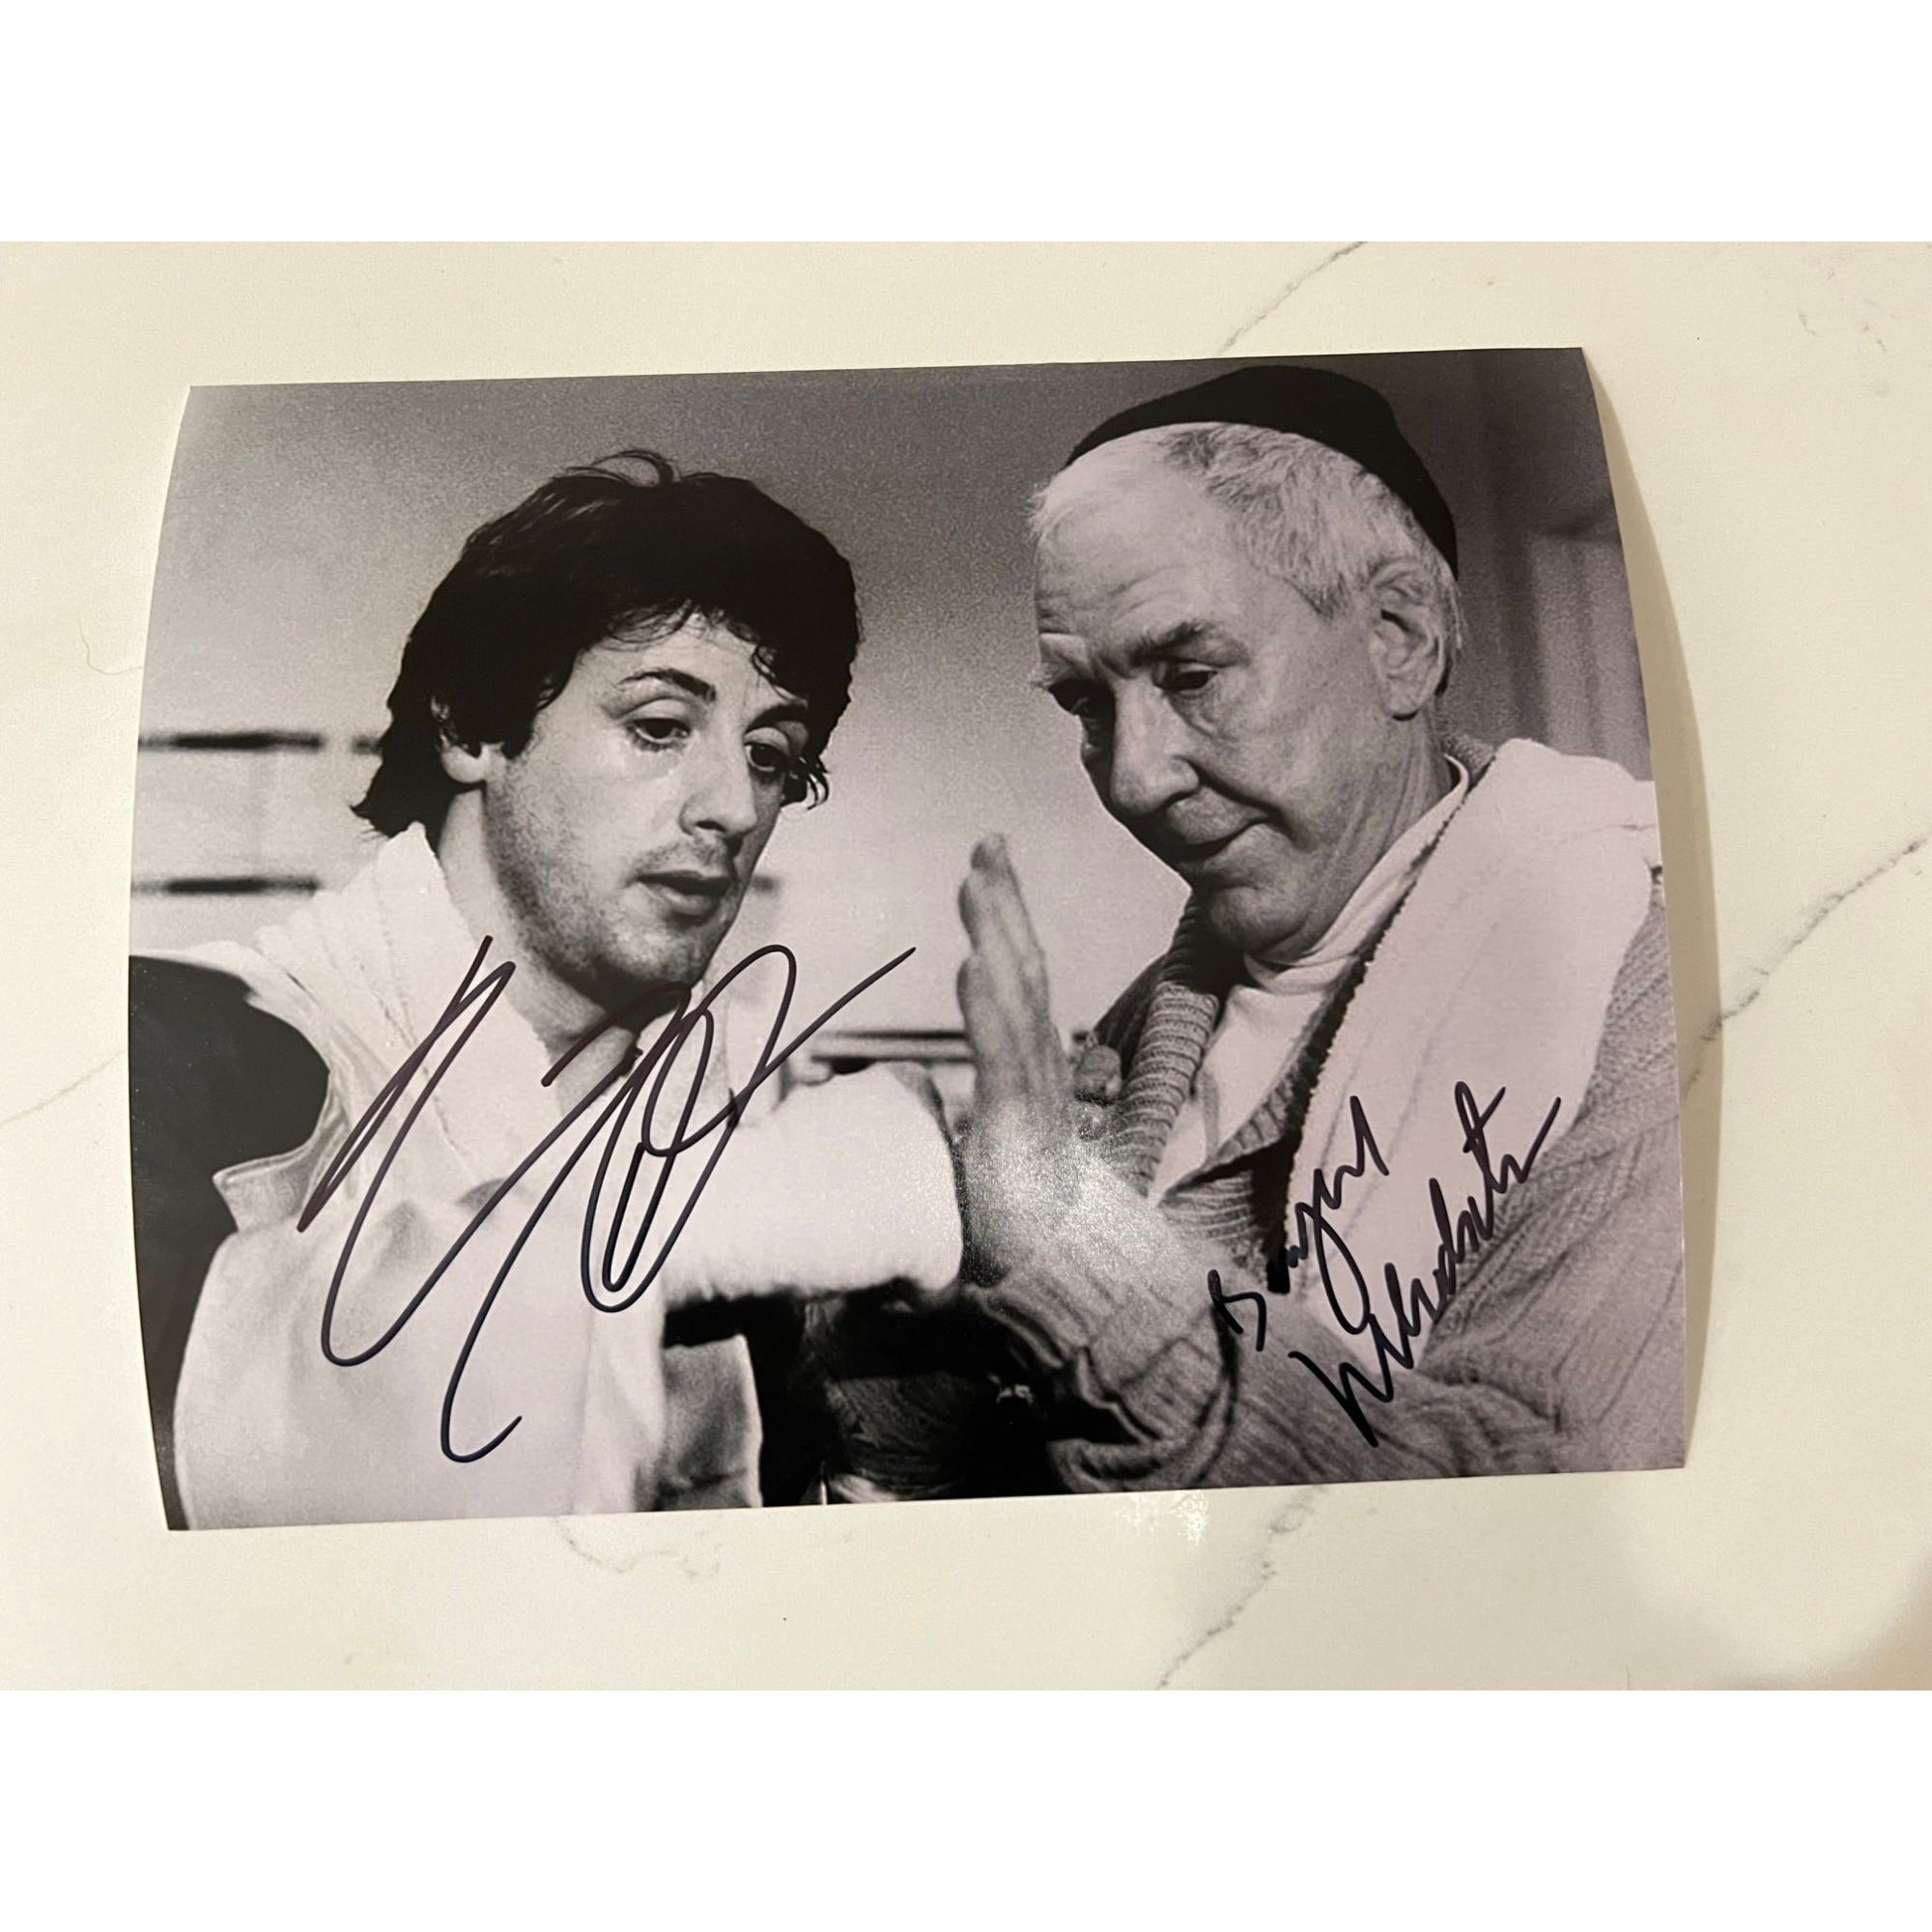 Sylvester Stallone "Rocky Balboa" and Burgess Meredith "Micky'' 8x10 photo signed with proof